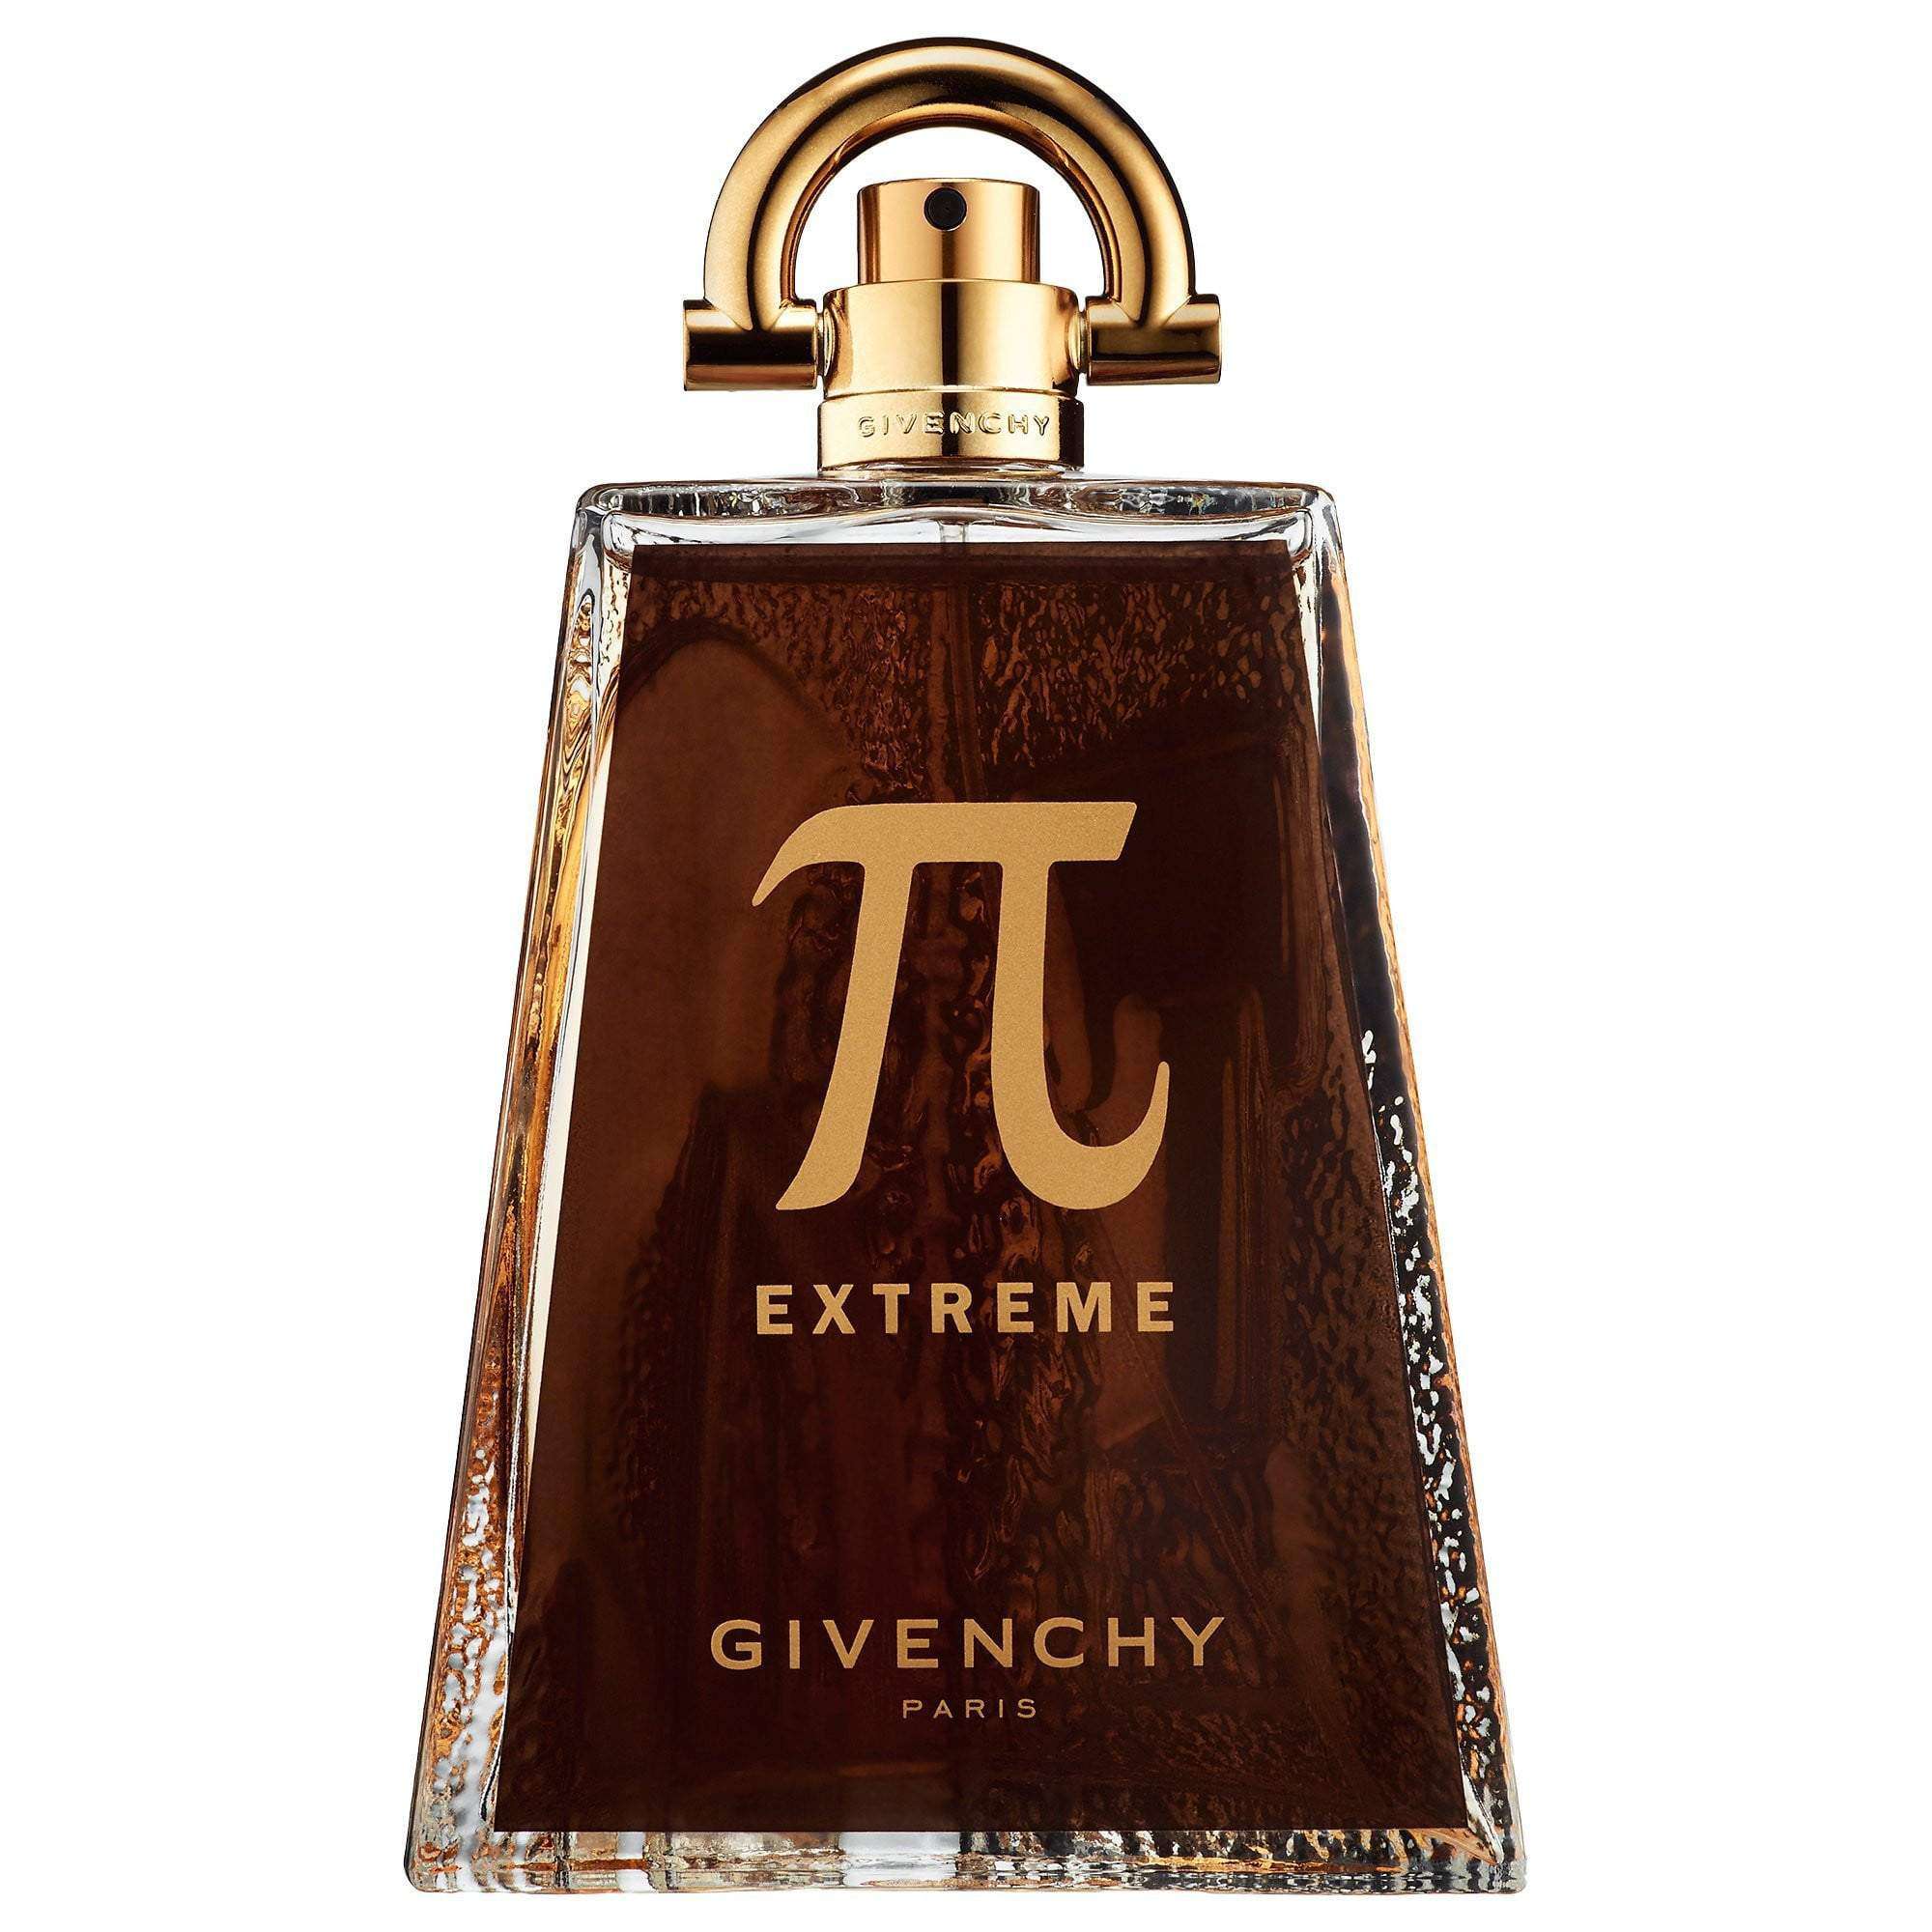 Givenchy Pi Extreme - 100ml Edt tester | Buy Perfume Online | My